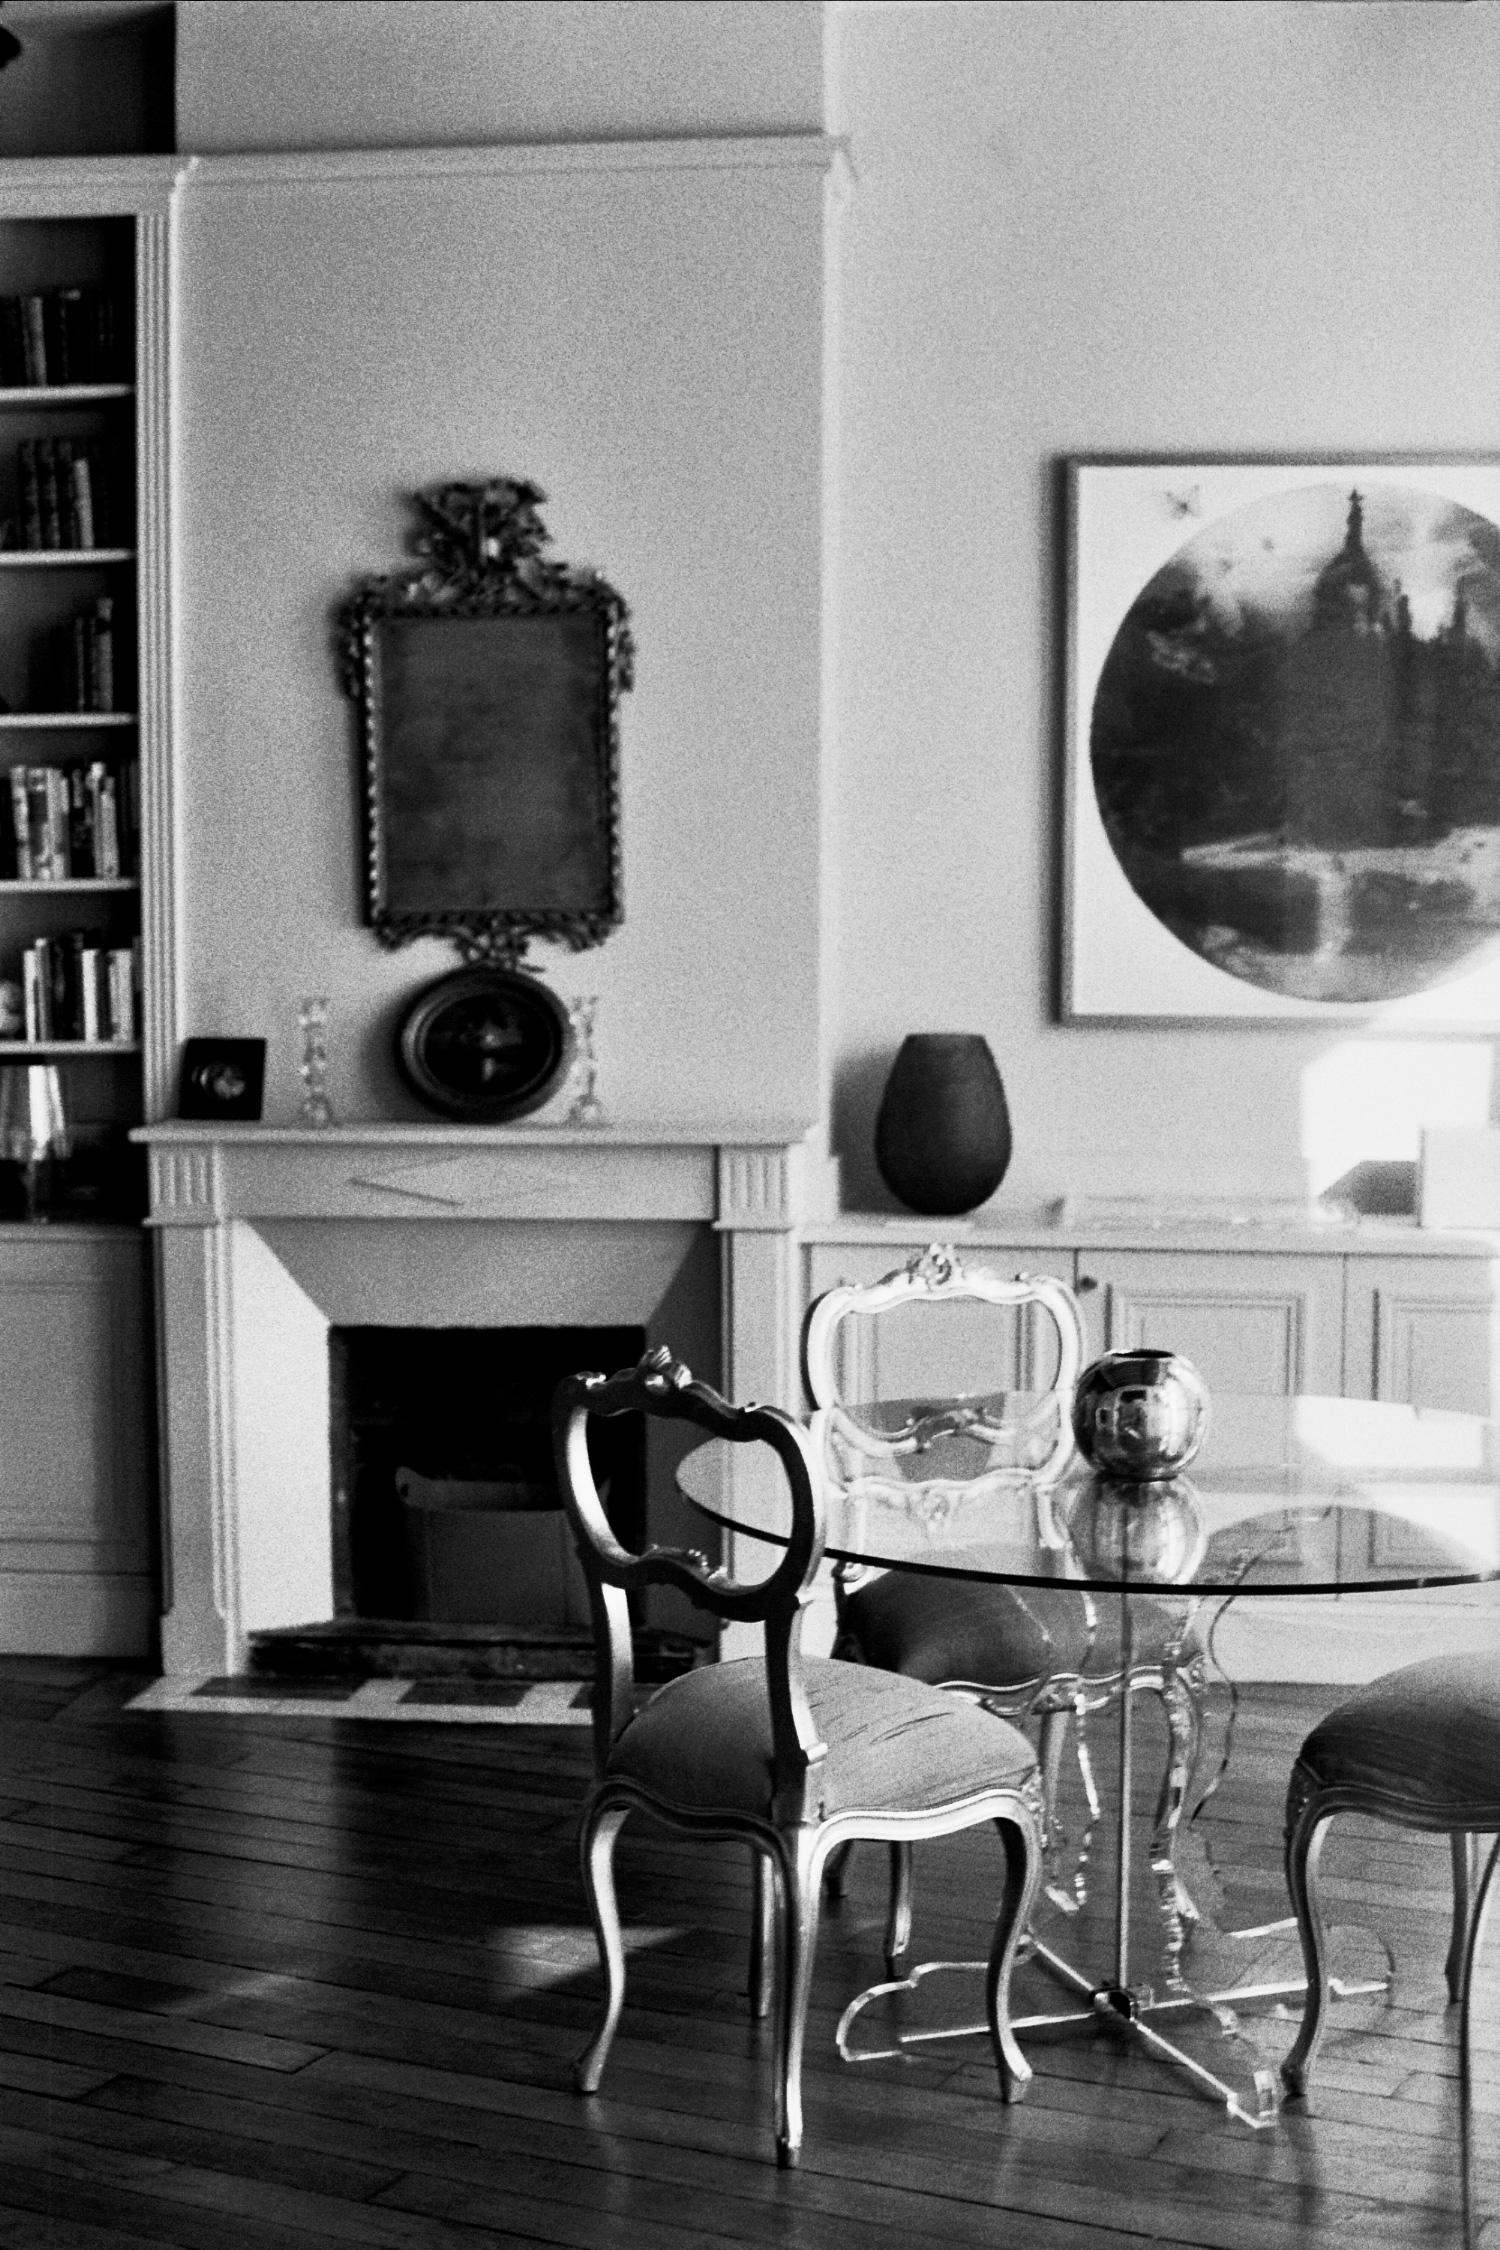 A black and white film story by photographer Jamie Beck of Paris in the Fall...